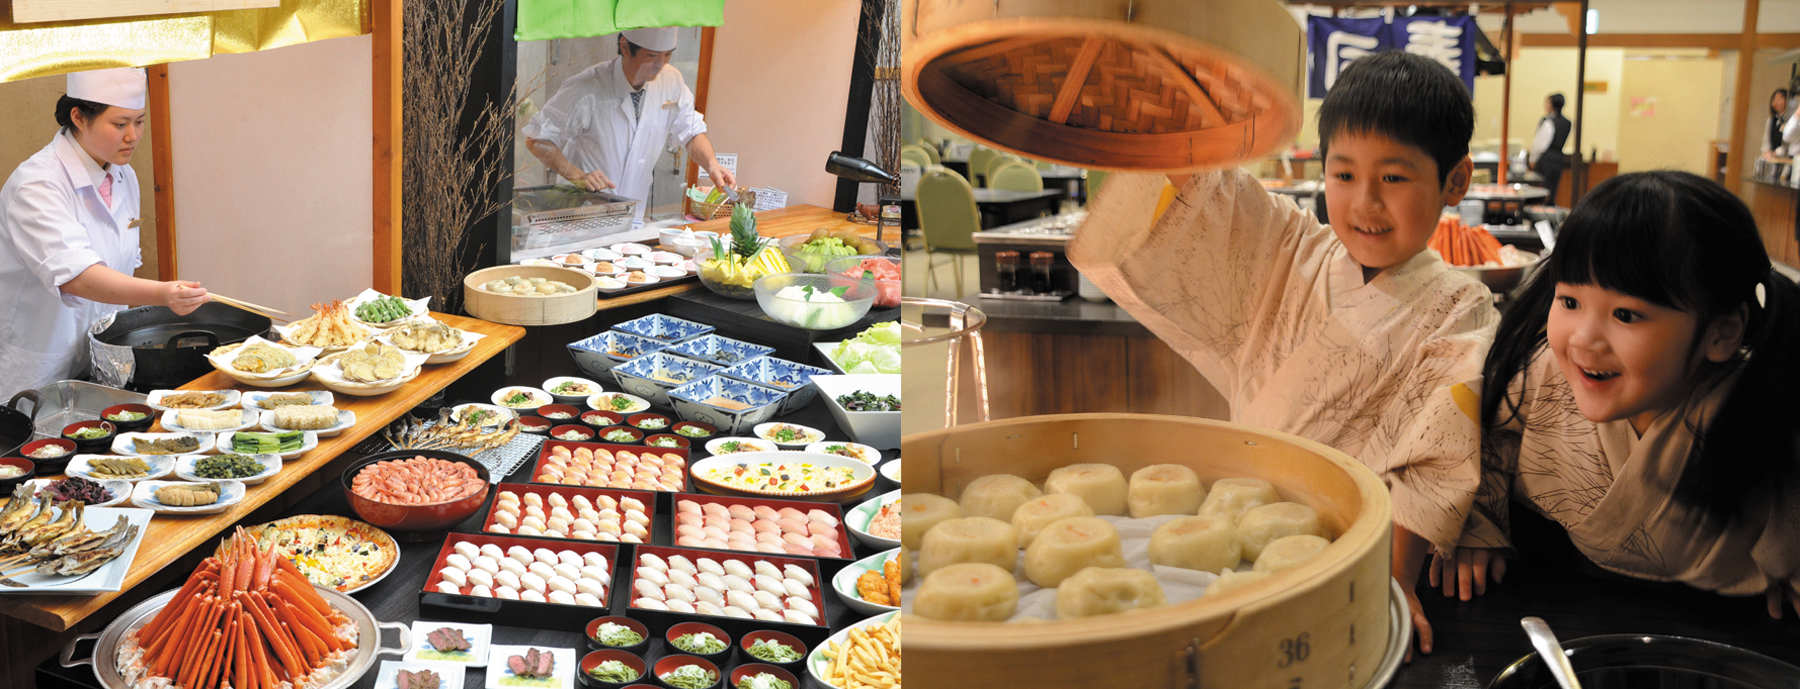 A spread of more than 70 dishes for breakfast and dinnerThe only buffet dinner option in the Omachi Hot Spring Town